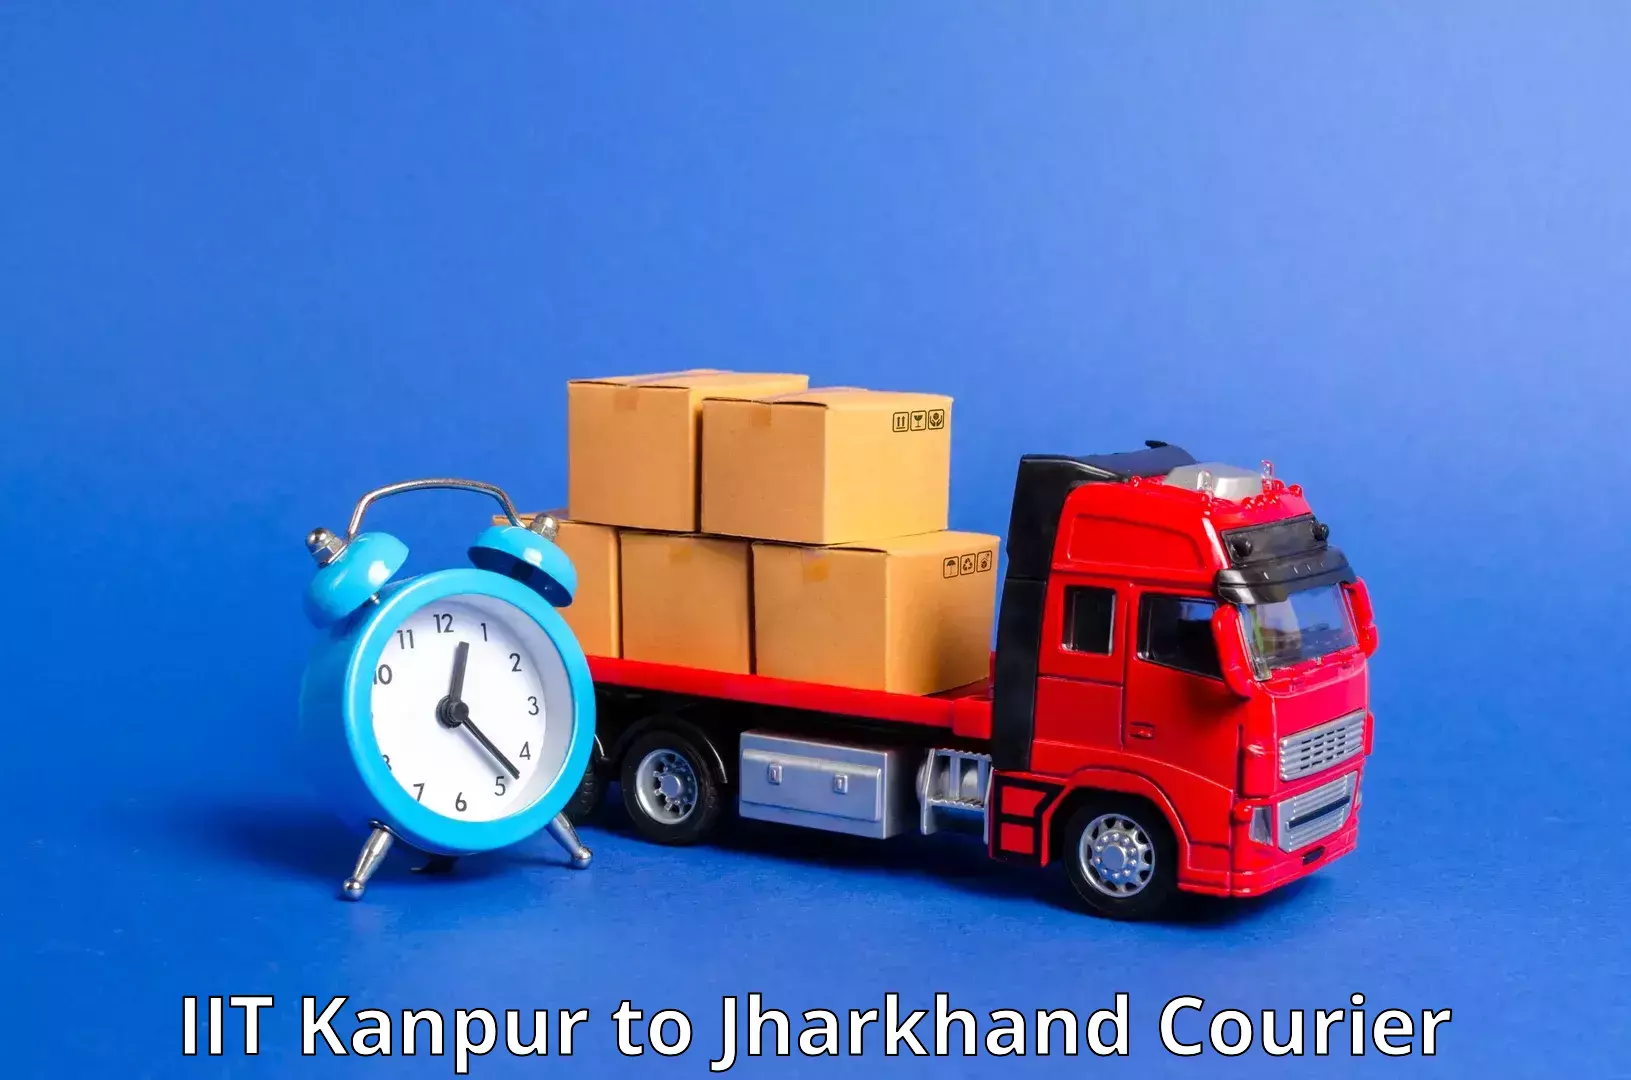 Courier service innovation IIT Kanpur to Chatra